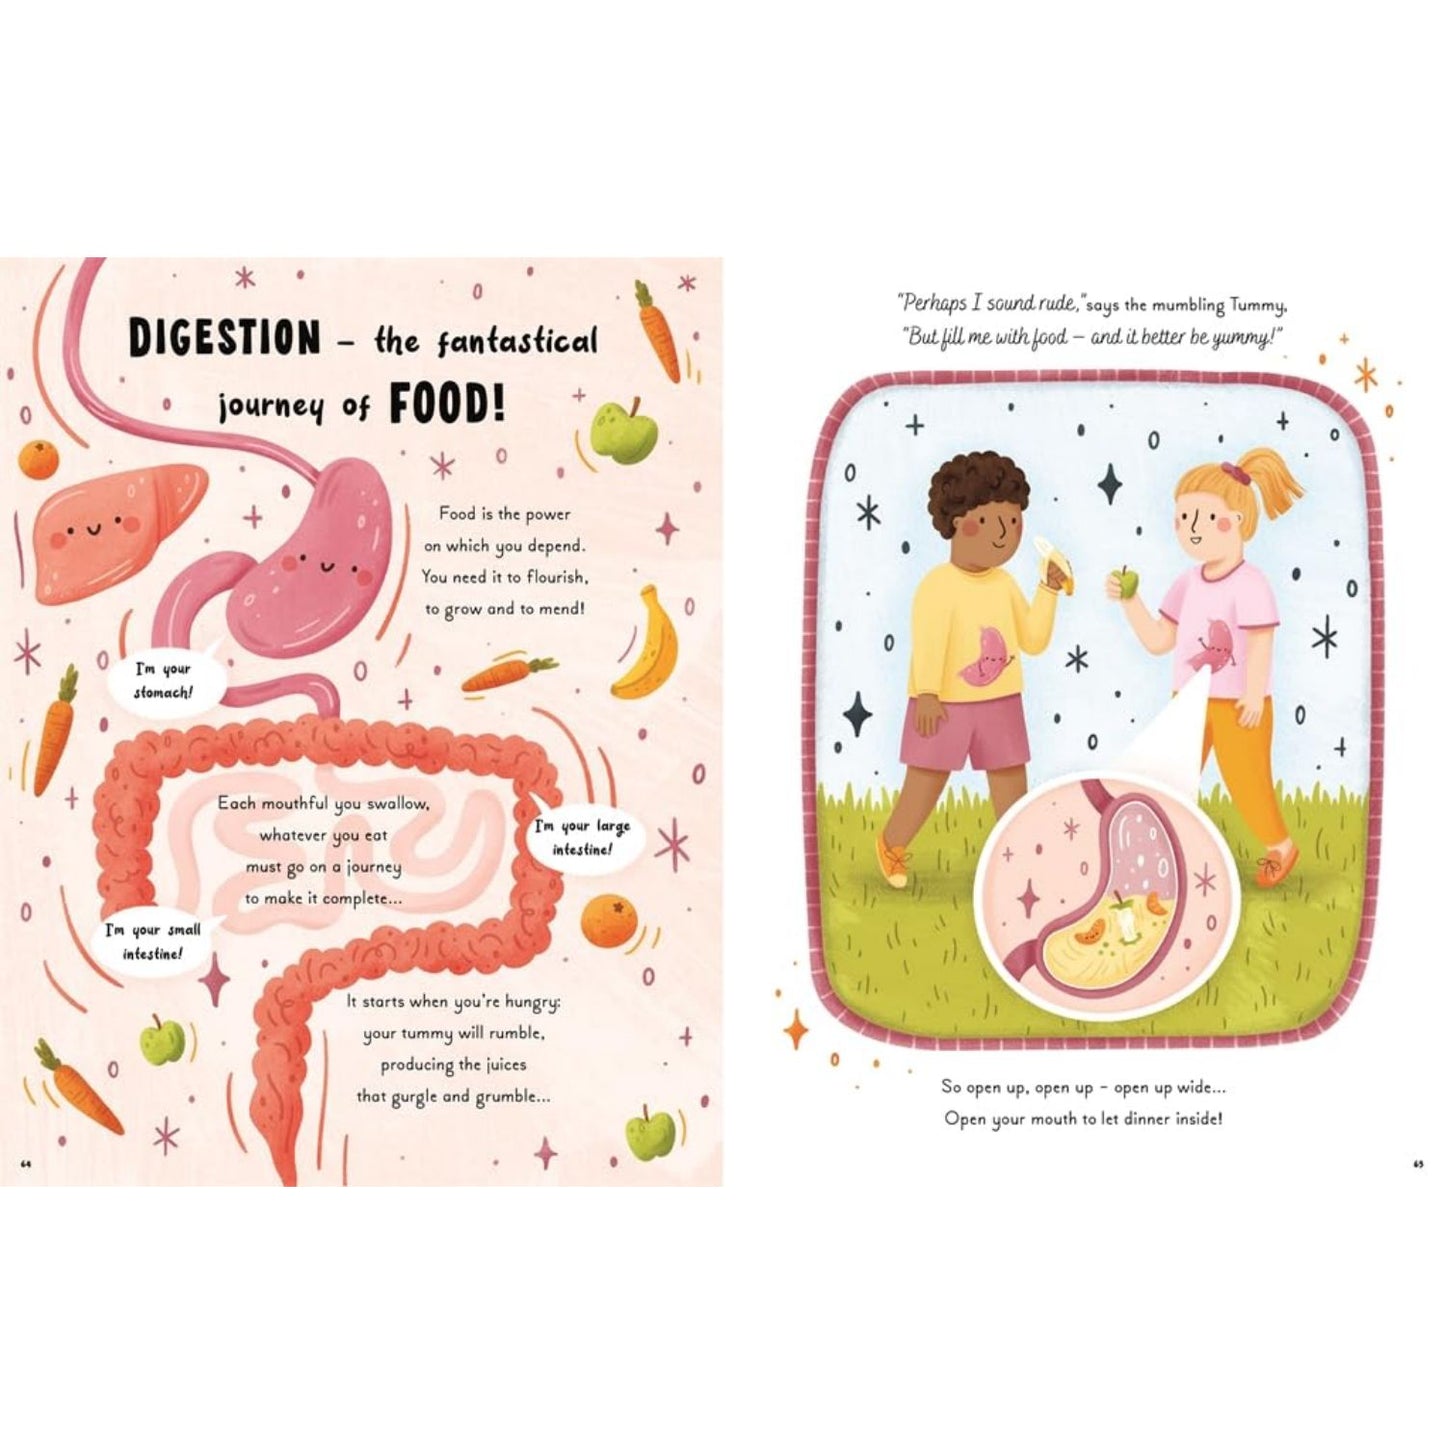 5 Minute Human Body Stories: Science to Read Out Loud! | Children's Books on Anatomy & Physiology